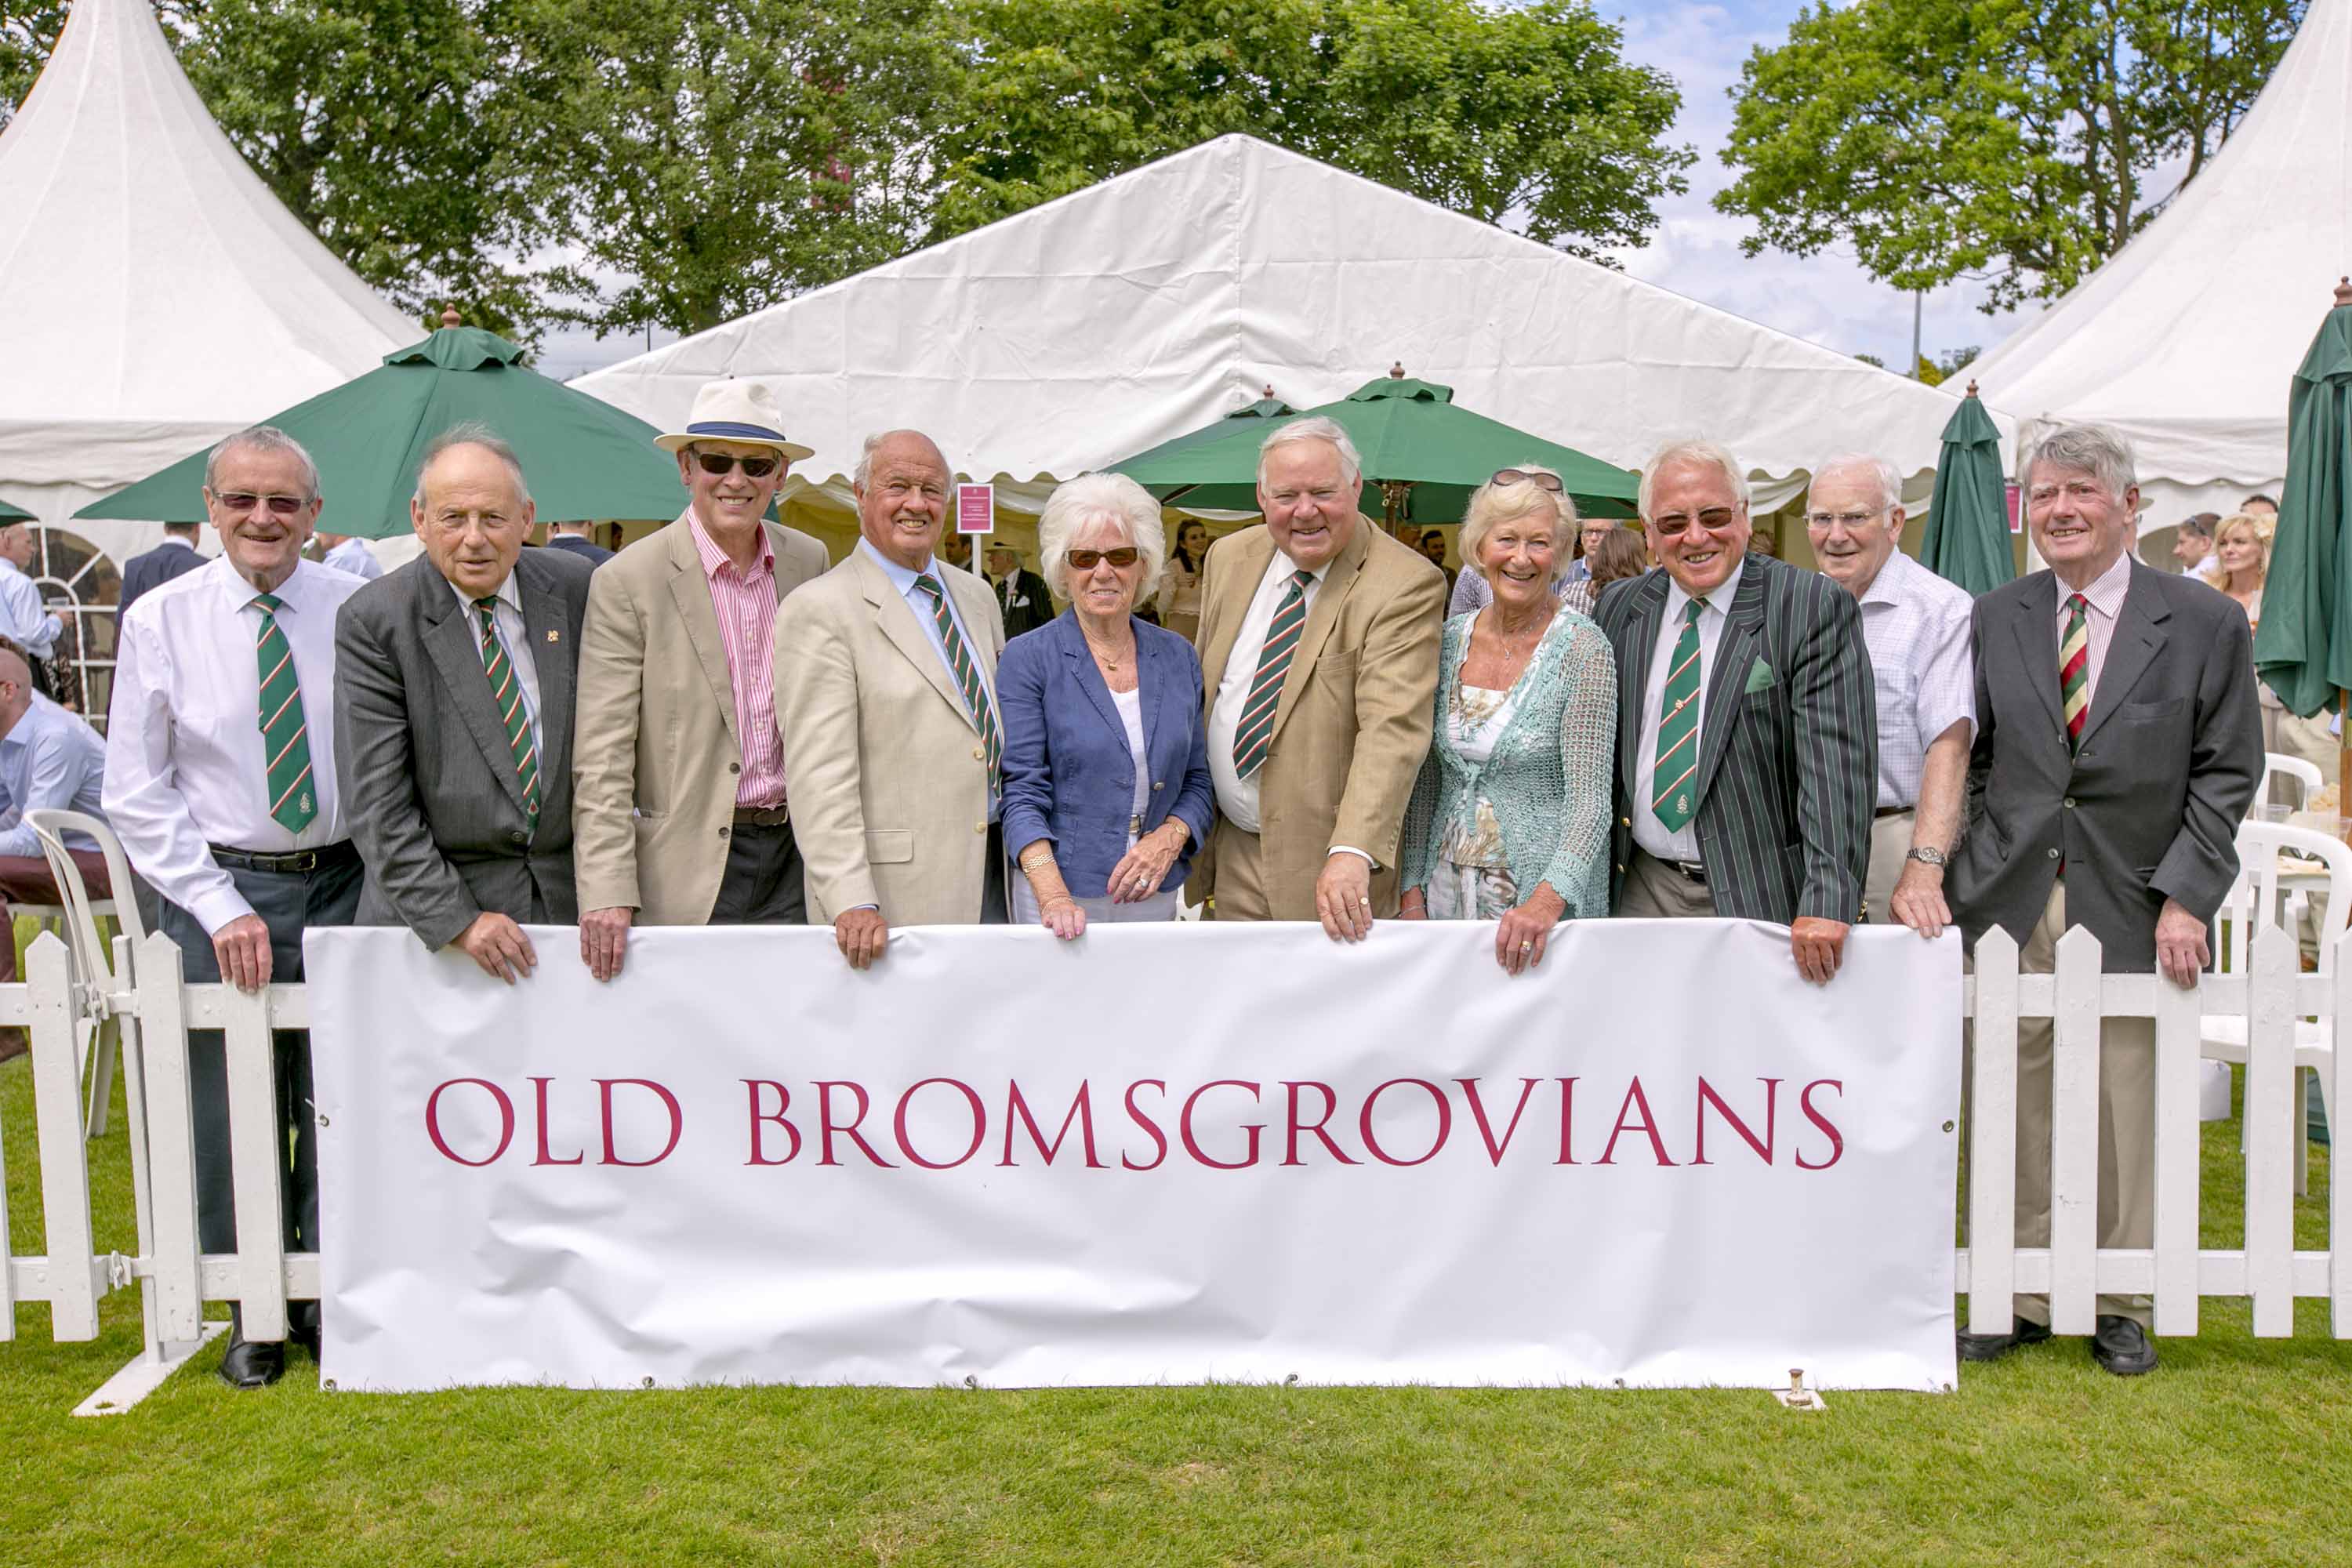 Commemoration Day 2015: Old Bromsgrovians outside the marquee on Lower Charford